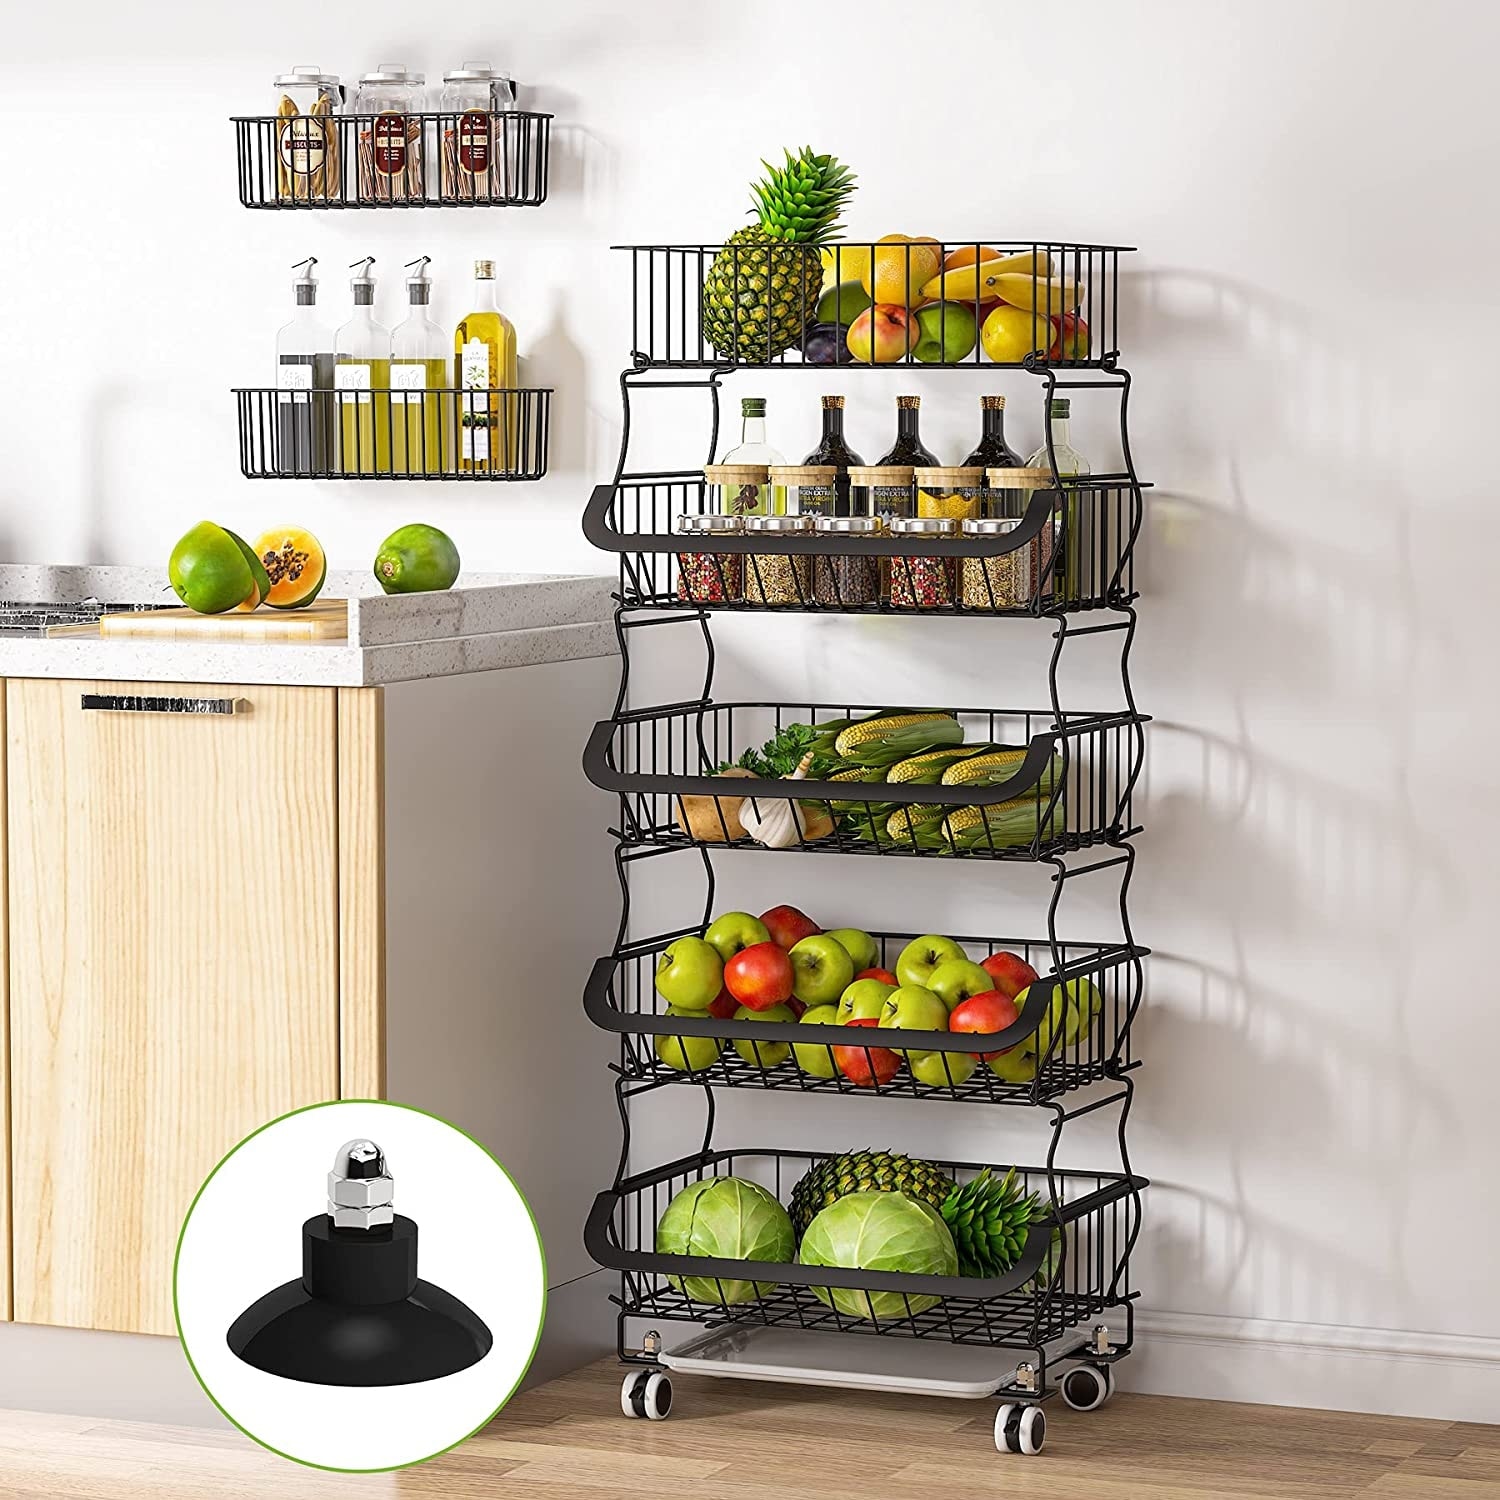 Carter Stainless 2-Tier Fruit Basket + Reviews